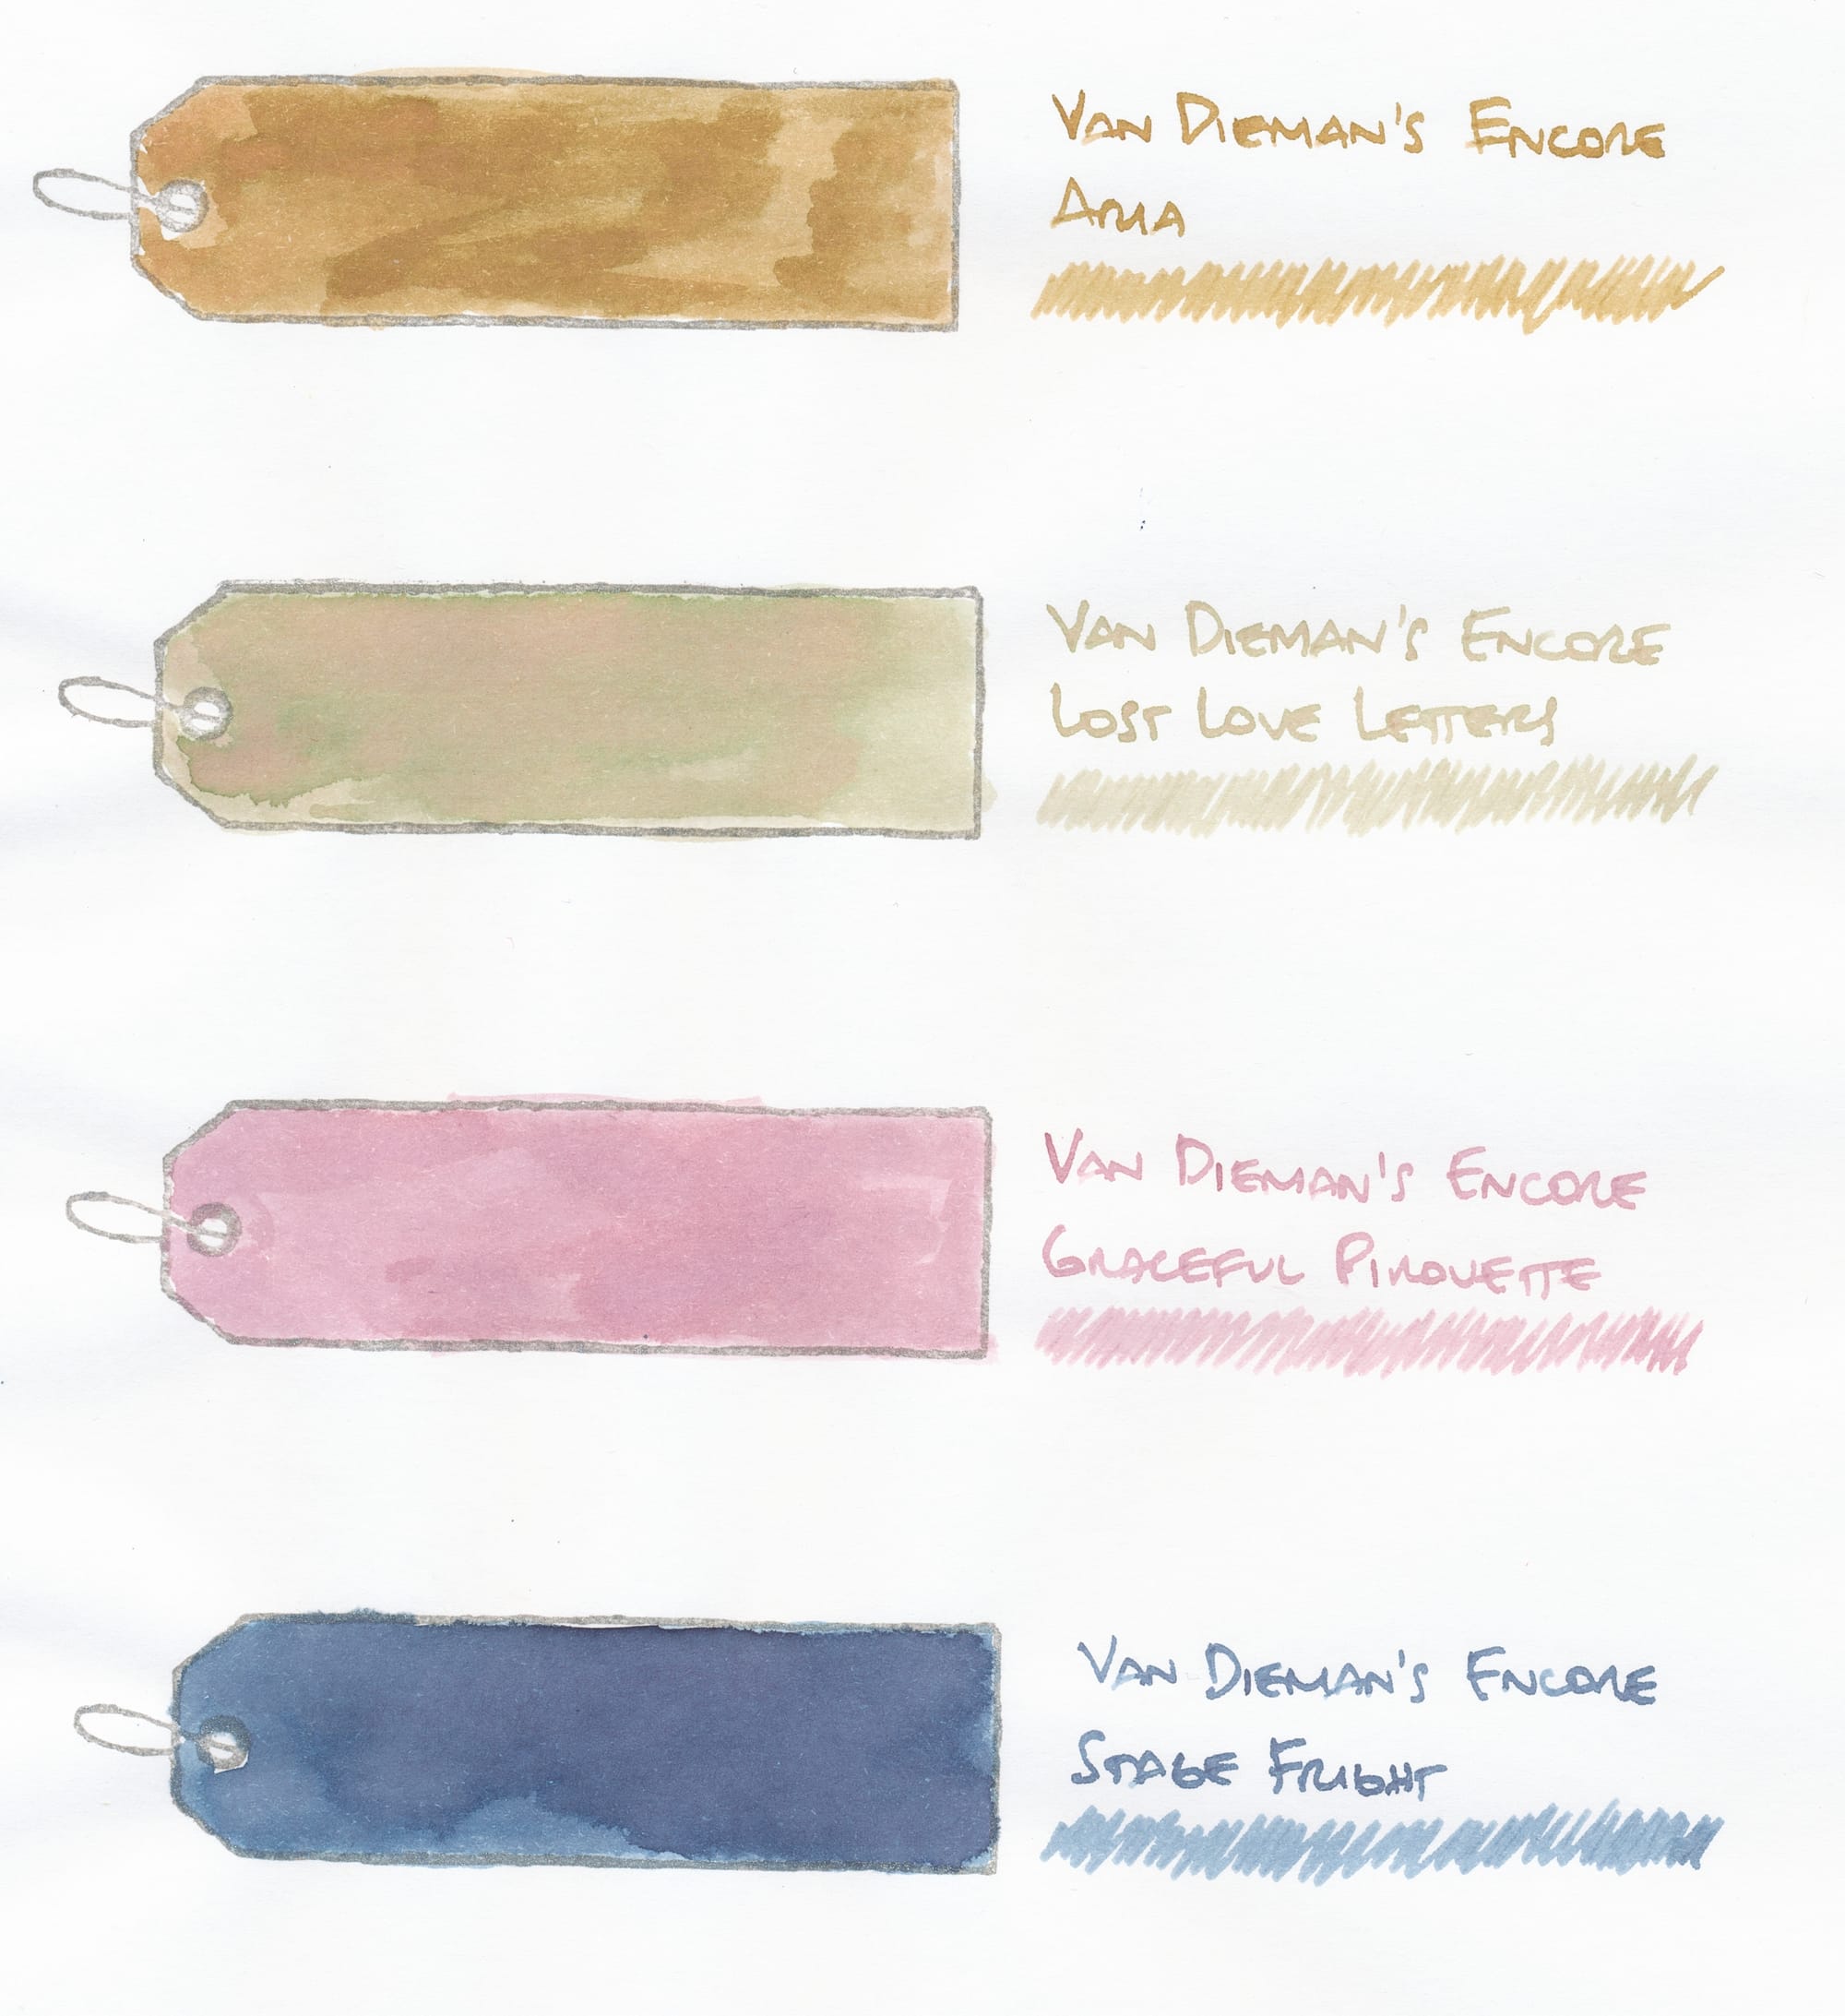 4 rubber stamped images of a long, narrow tag, filled in with ink swatches of 4 different inks: Aria, a medium-light beige/tan with light pink undertones; Lost Love Letters, a light green-brown with visible pink undertones; Graceful Pirouette, a soft medium pink, similar to cherry blossom color; Stage Fright, a medium translucent blue with some light pink undertones